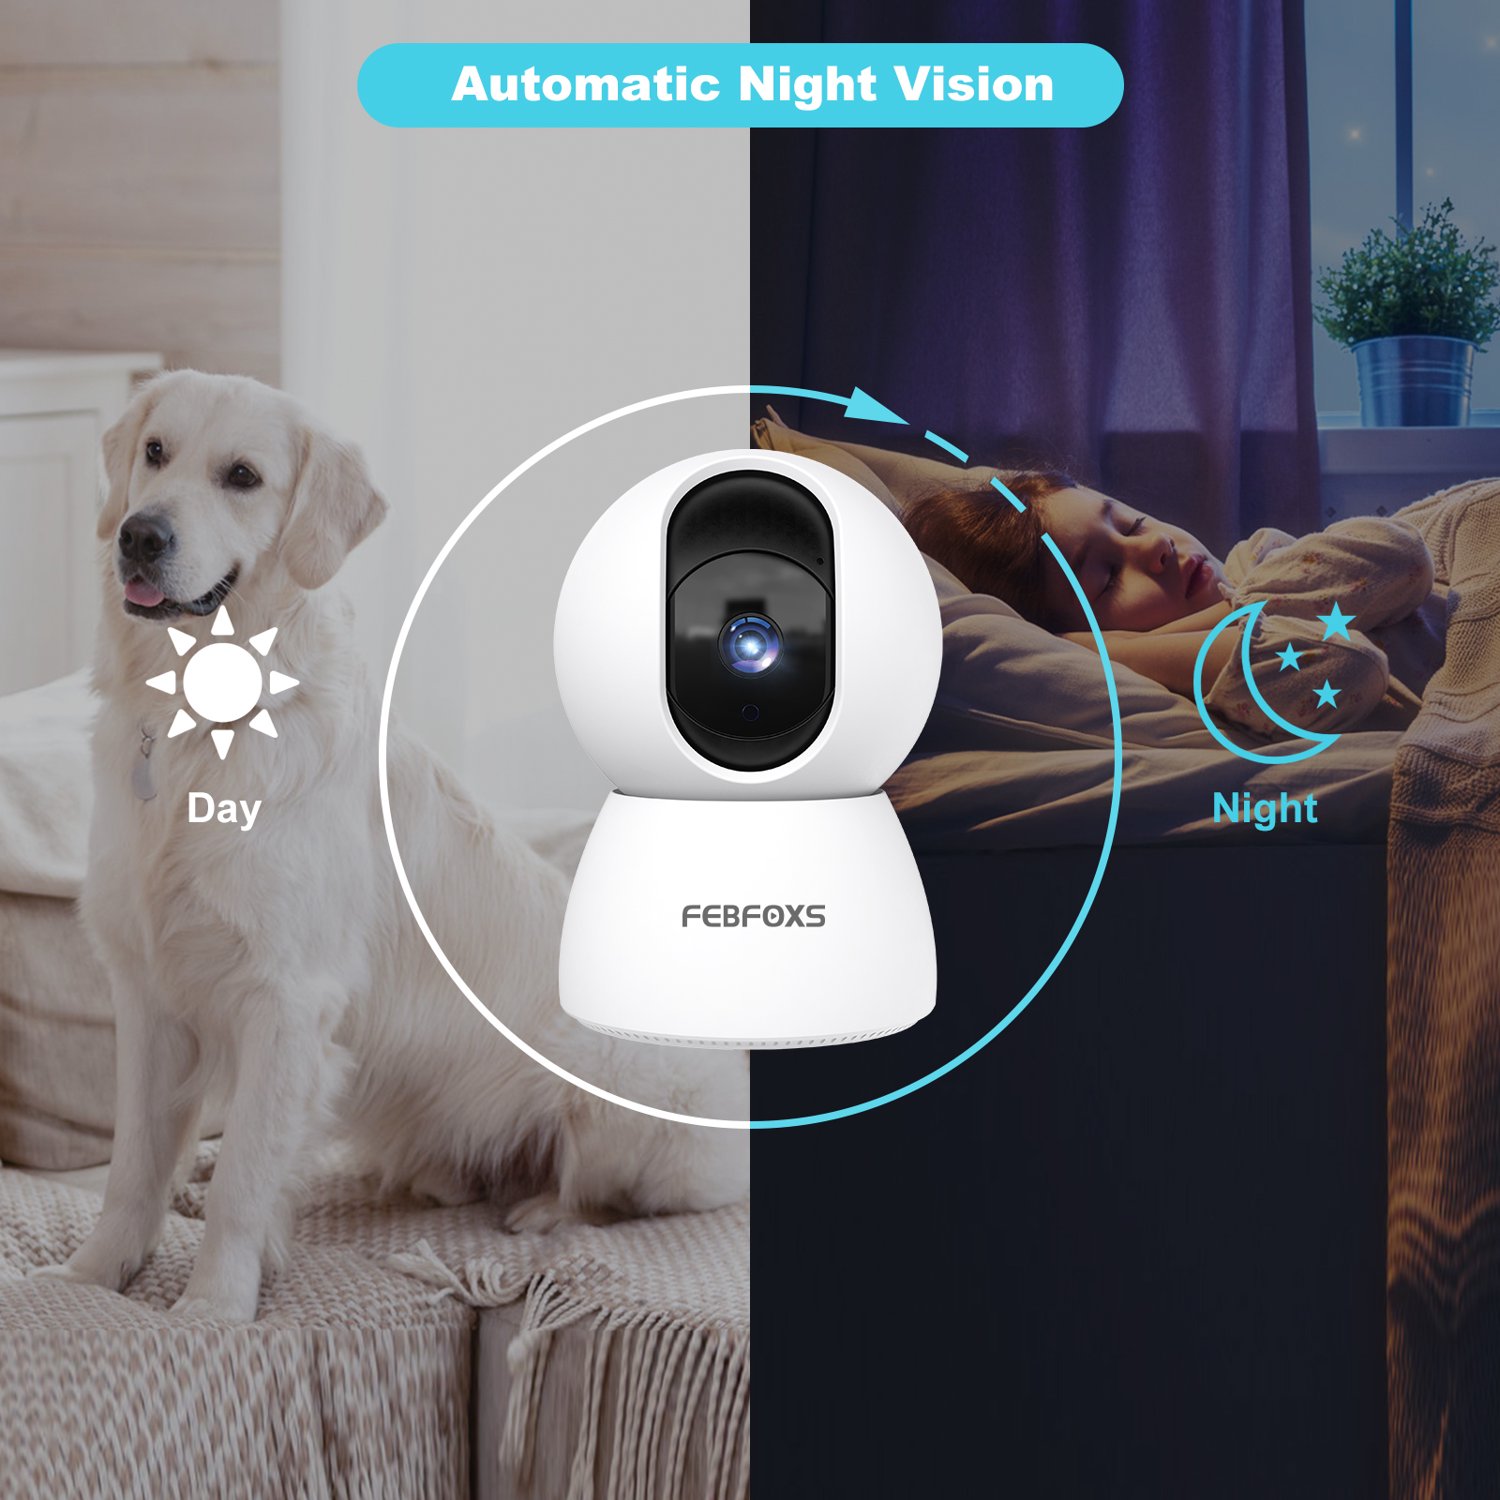 Febfoxs D305 Baby Monitor Security Camera for Home Security - image 6 of 7